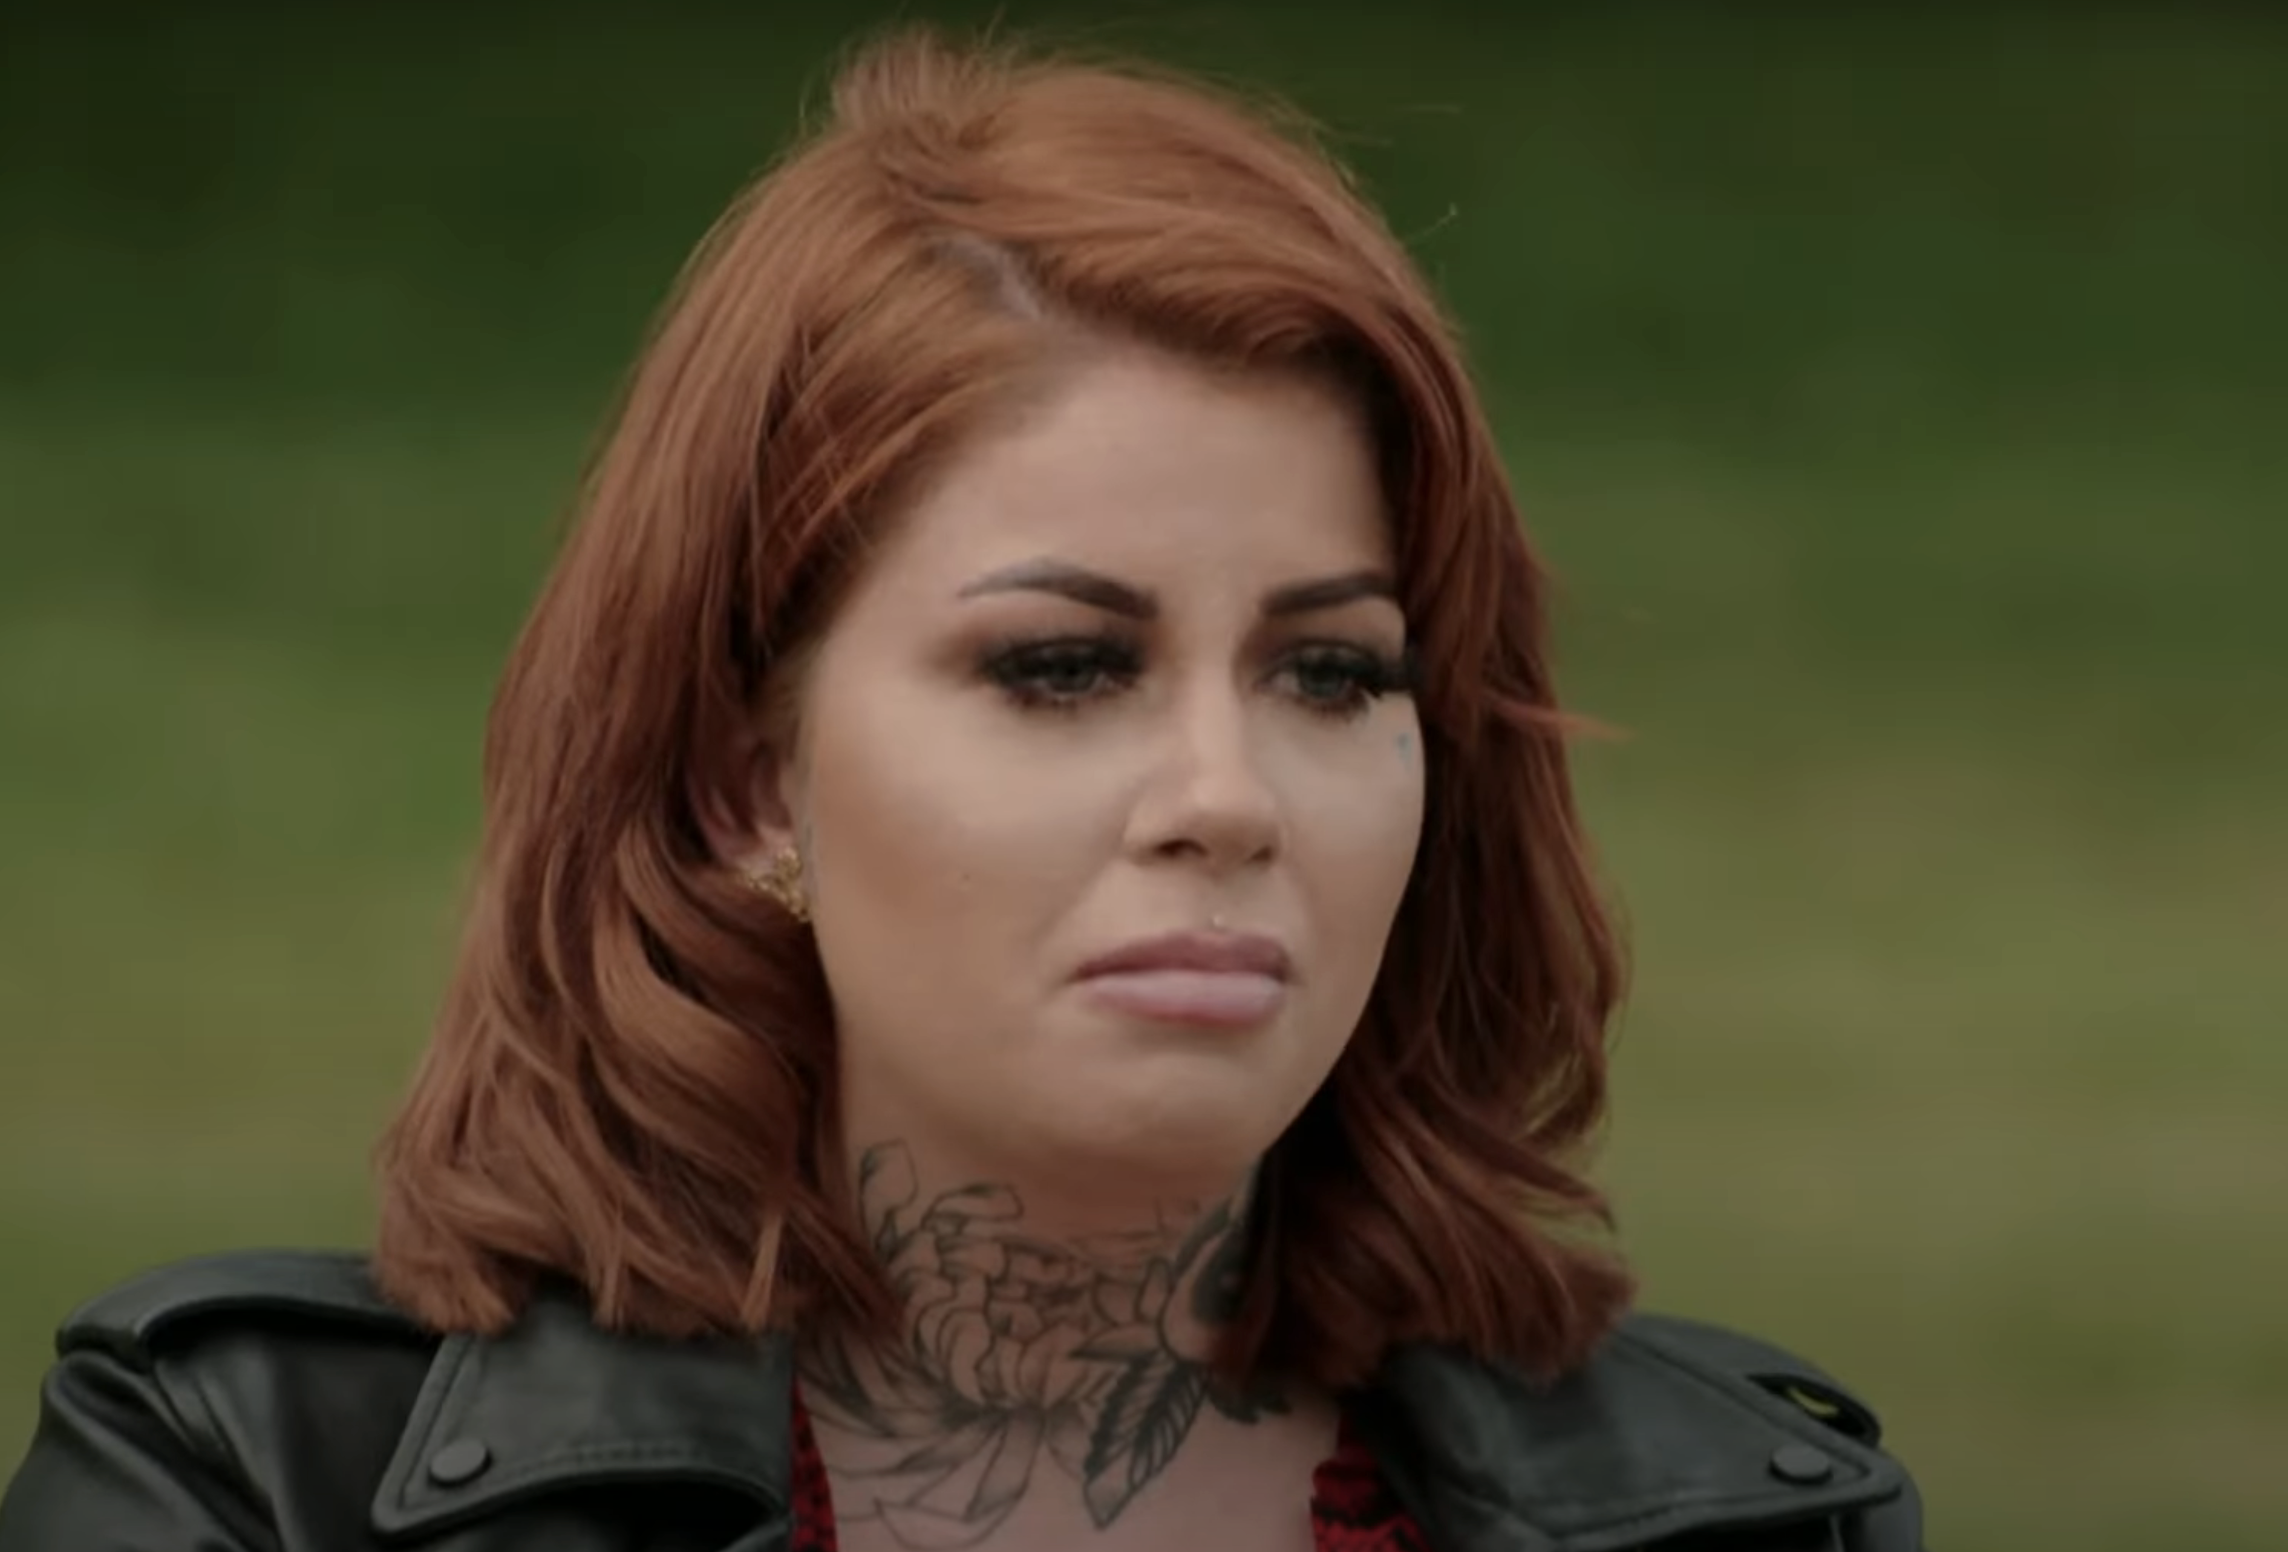 Close-up of Gemma looking pensive, wearing a dark jacket with a visible tattoo on her chest